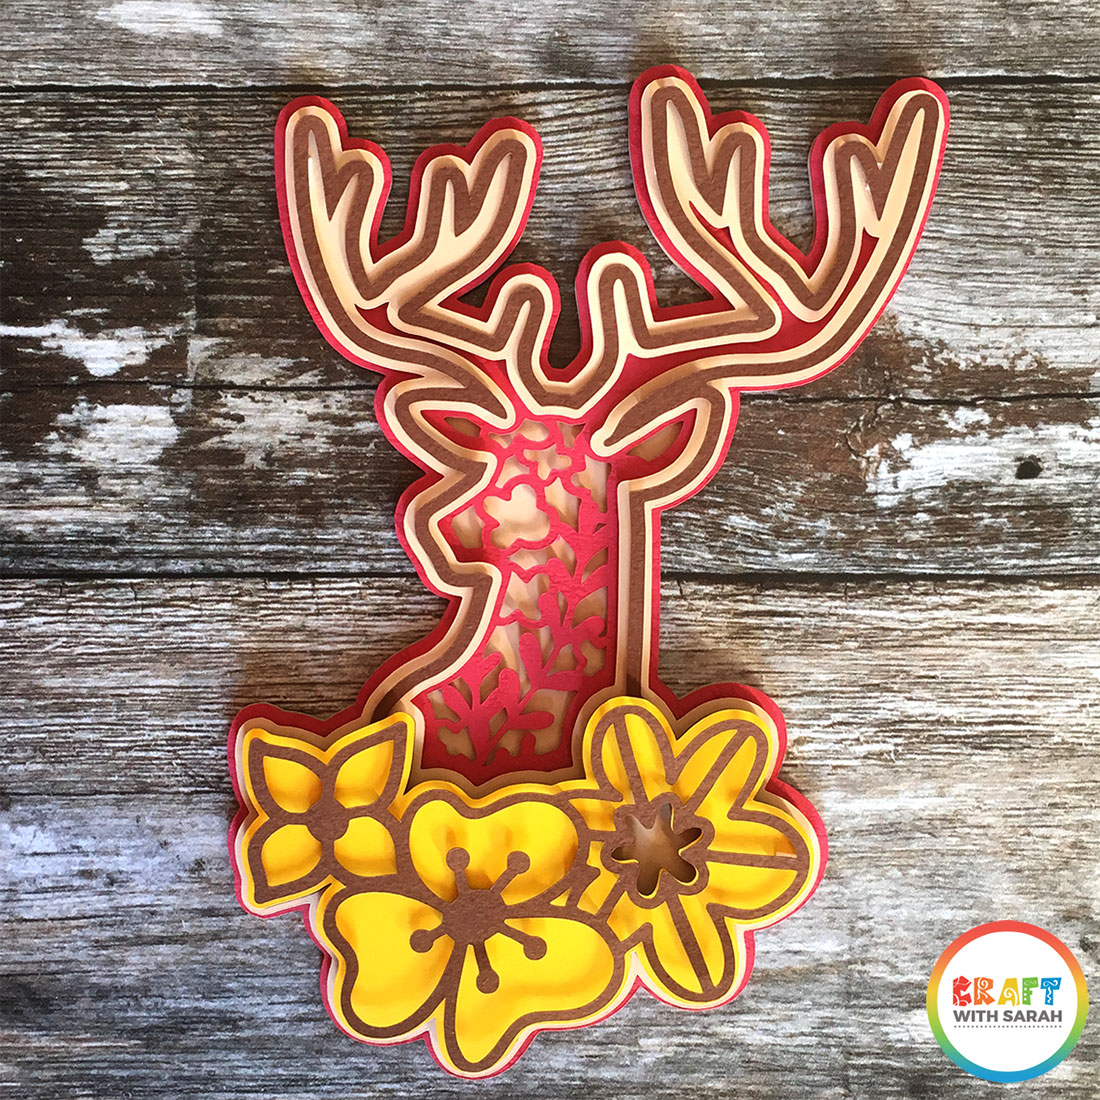 Stag Head Layered SVG | Craft With Sarah